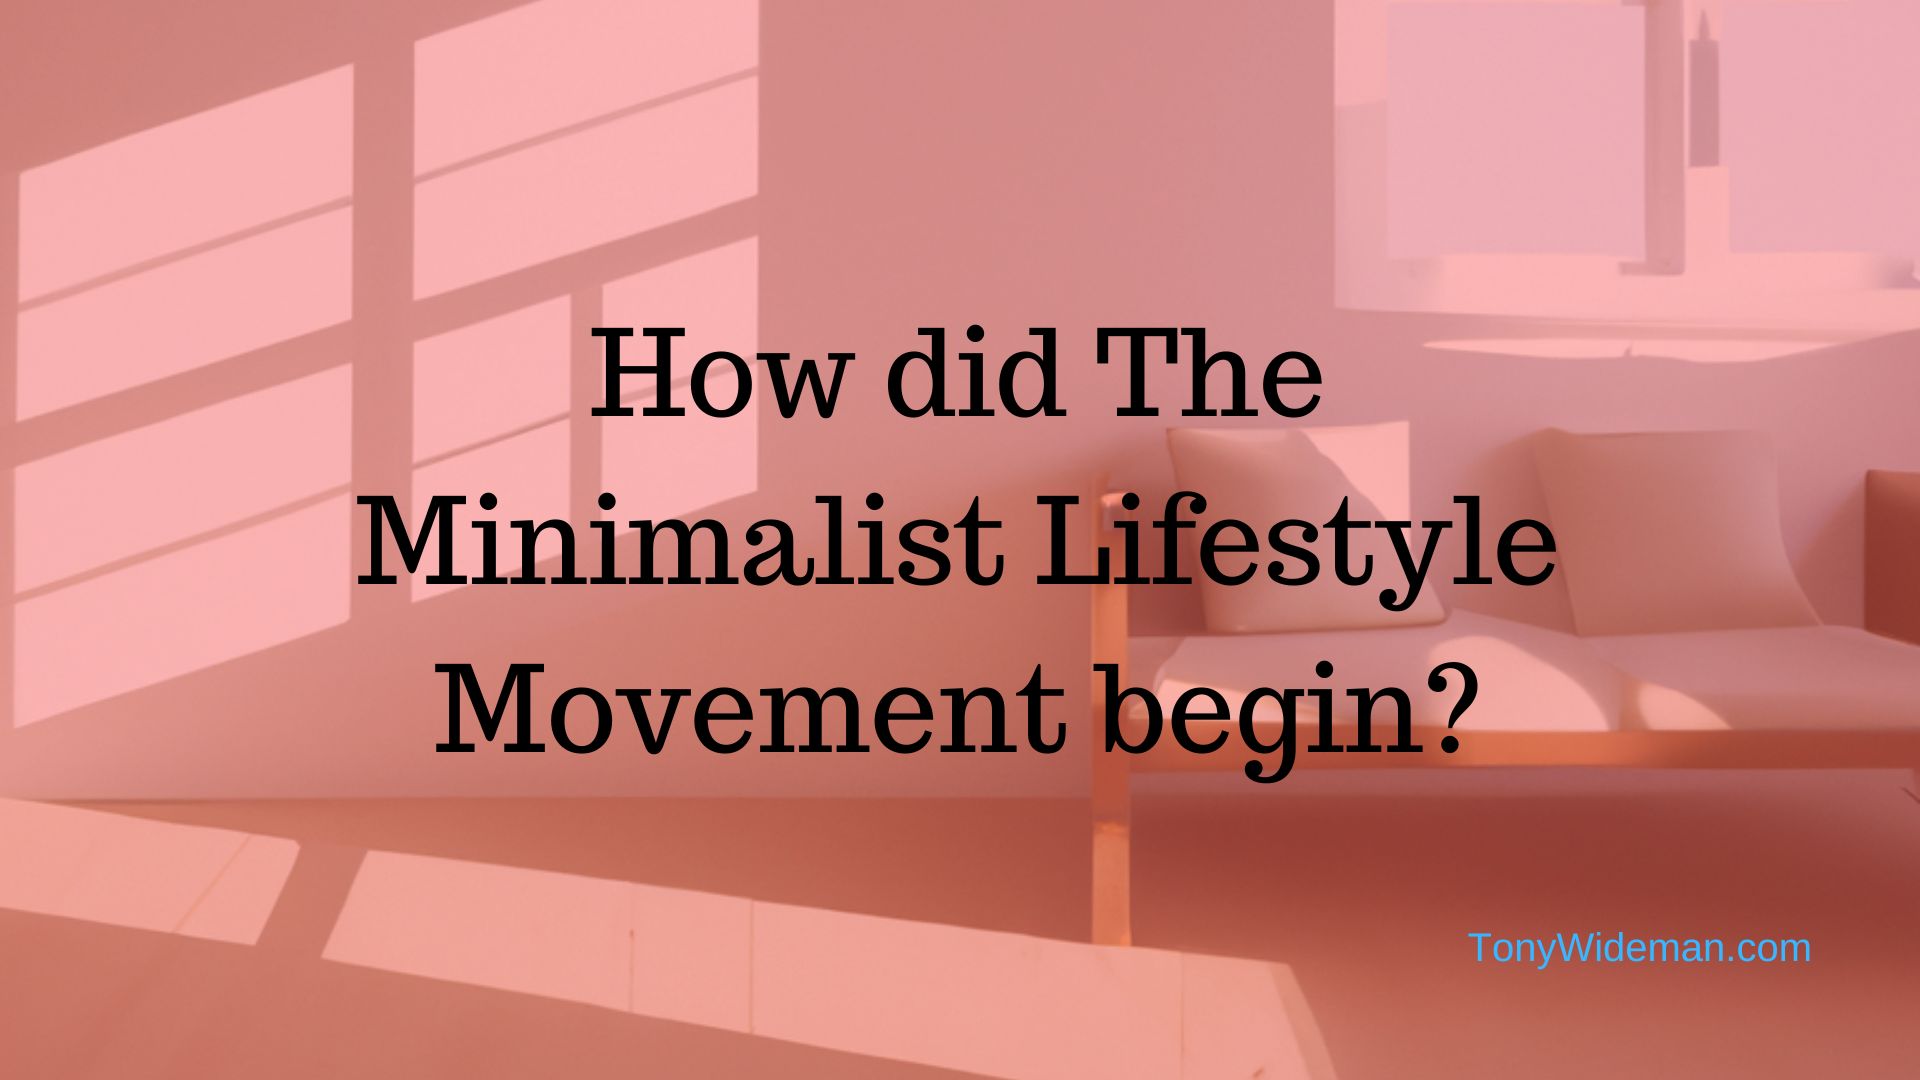 How did The Minimalist Lifestyle Movement begin?